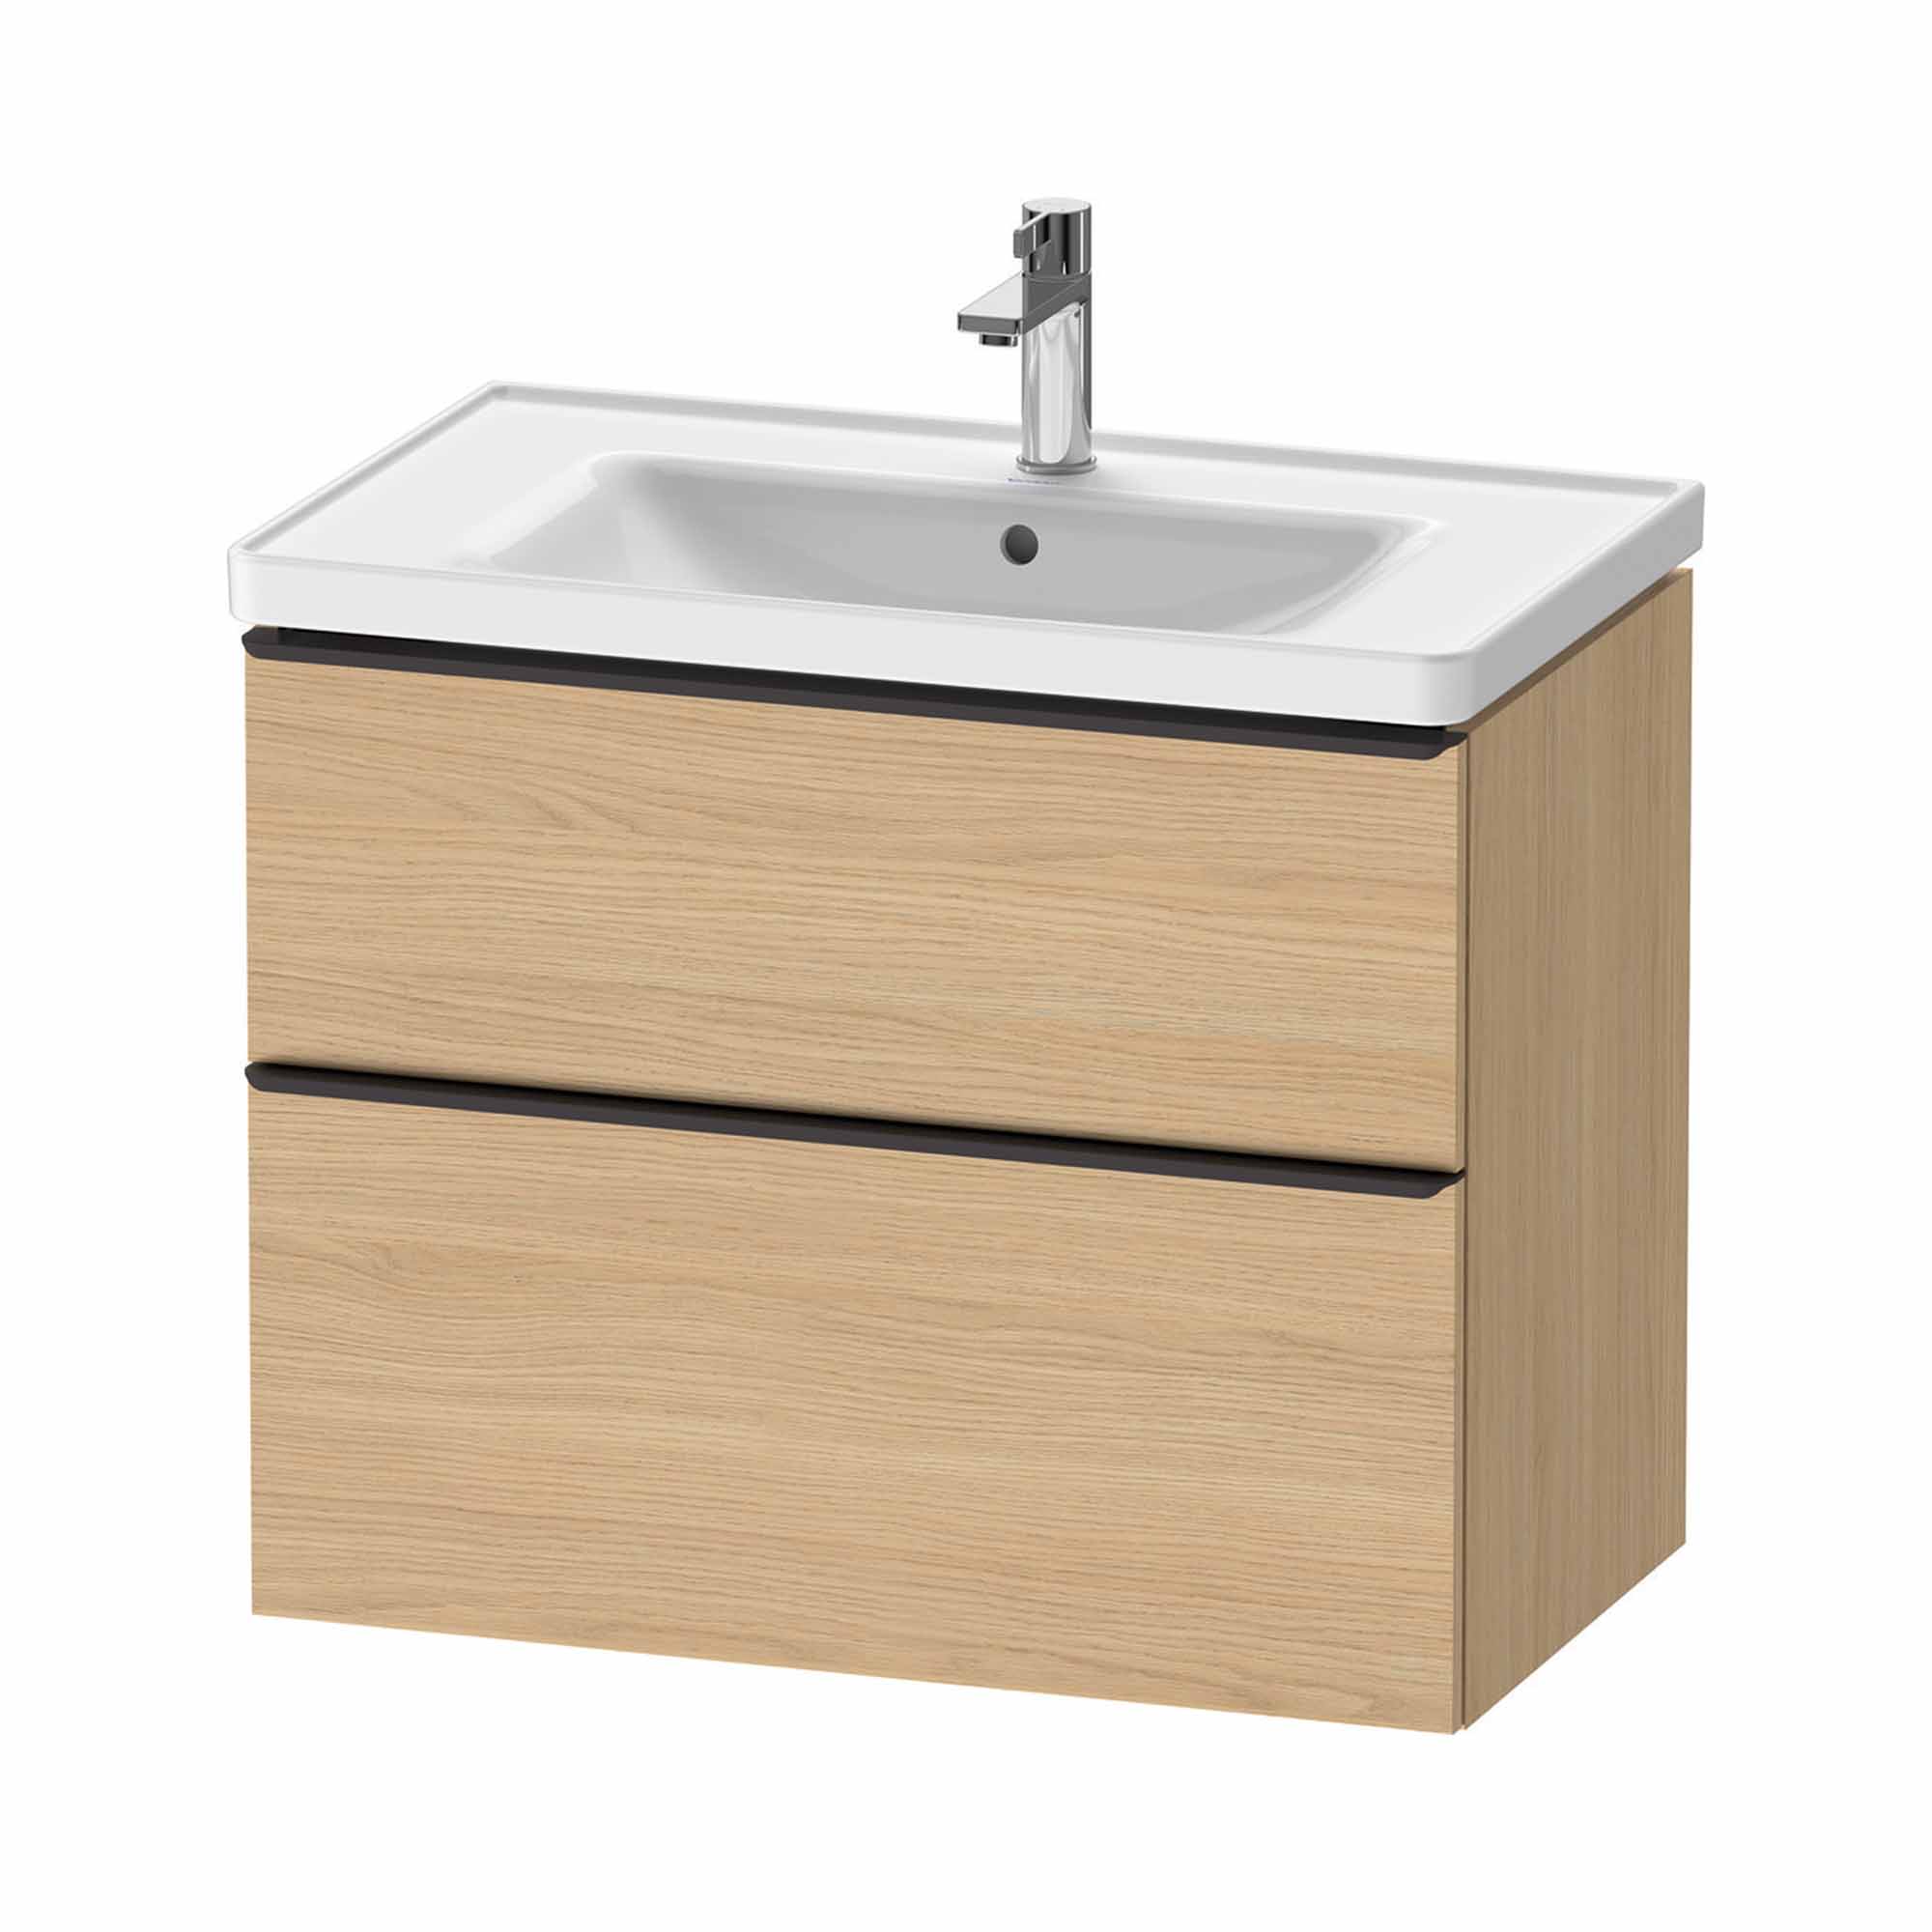 duravit d-neo 800mm wall mounted vanity unit with d-neo basin natural oak diamond black handles